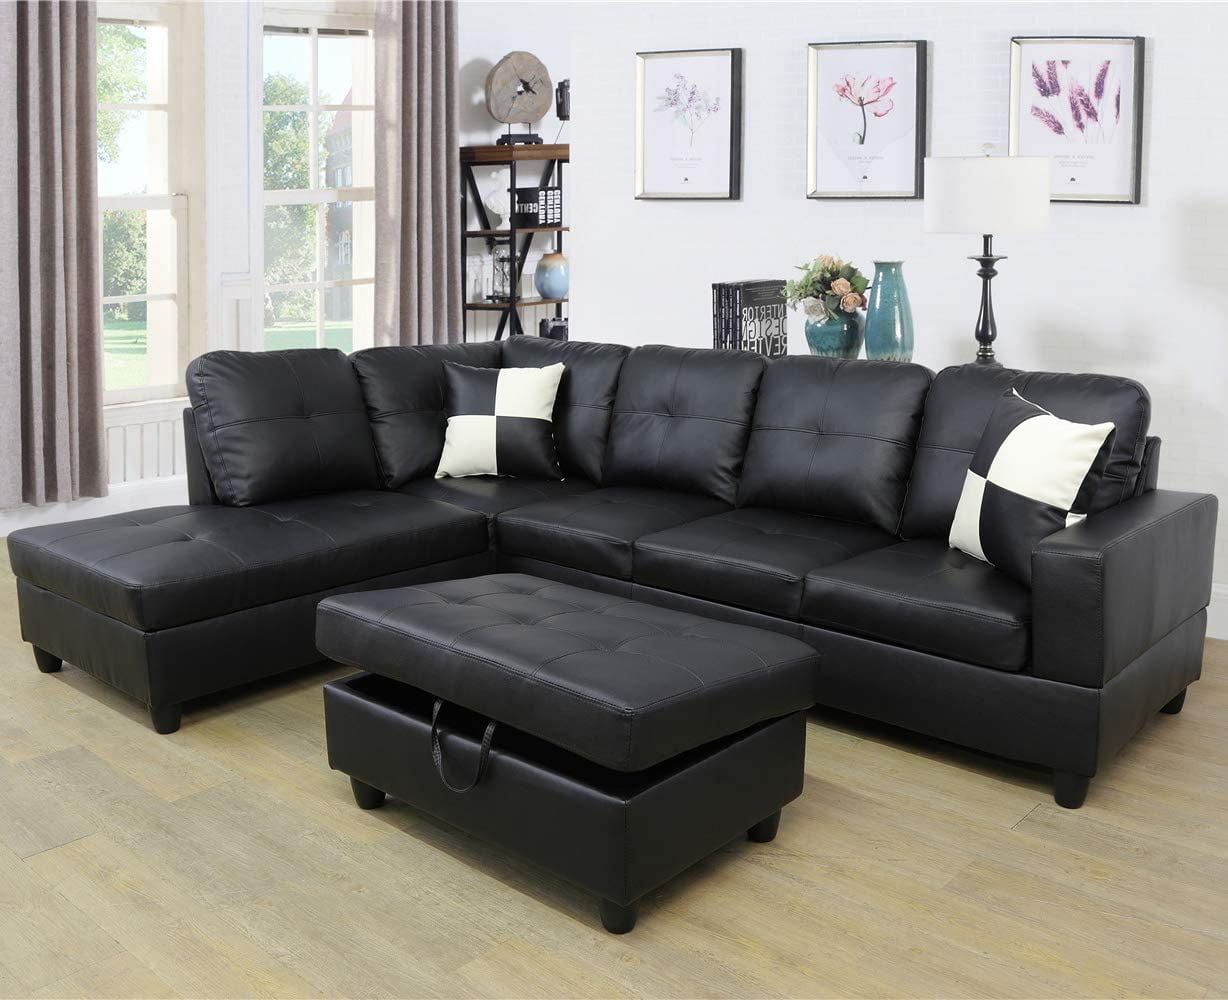 Gcf Faux Leather 3 Piece Sectional Sofa Couch Set, L Shaped Modern Sofa  With Chaise Storage Ottoman And Pillows For Living Room Furniture, Left  Hand Facing Sectional Sofa Set Black – Walmart In 3 Piece Leather Sectional Sofa Sets (Photo 3 of 15)